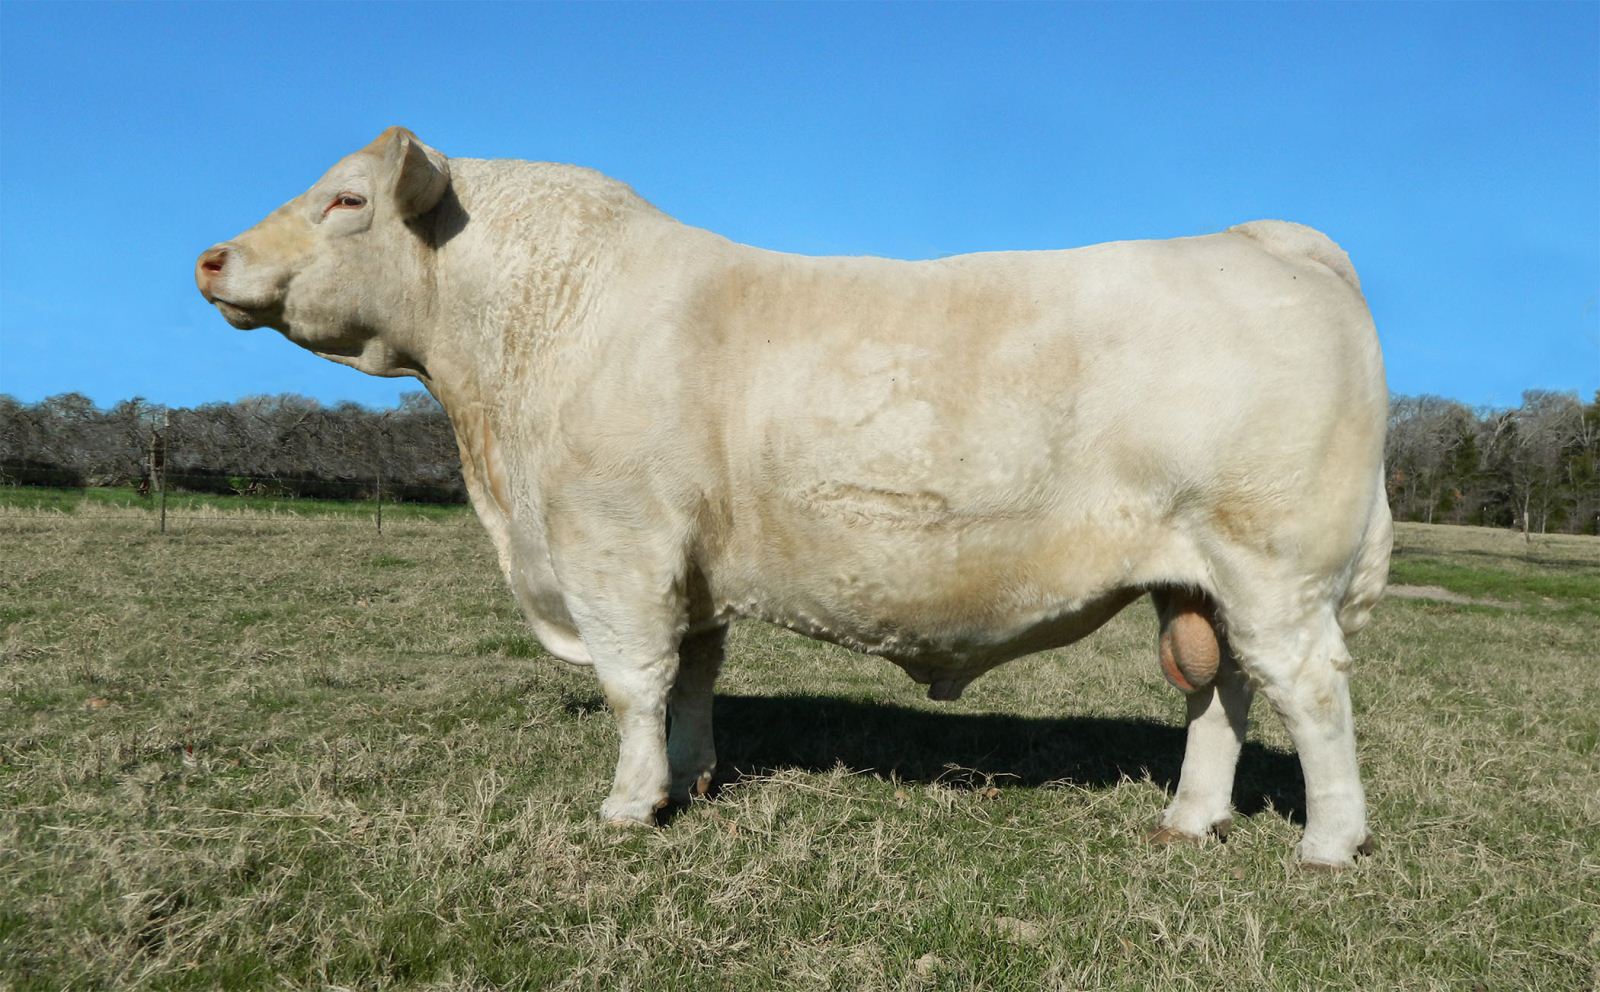 large white bull in pasture with blue sky